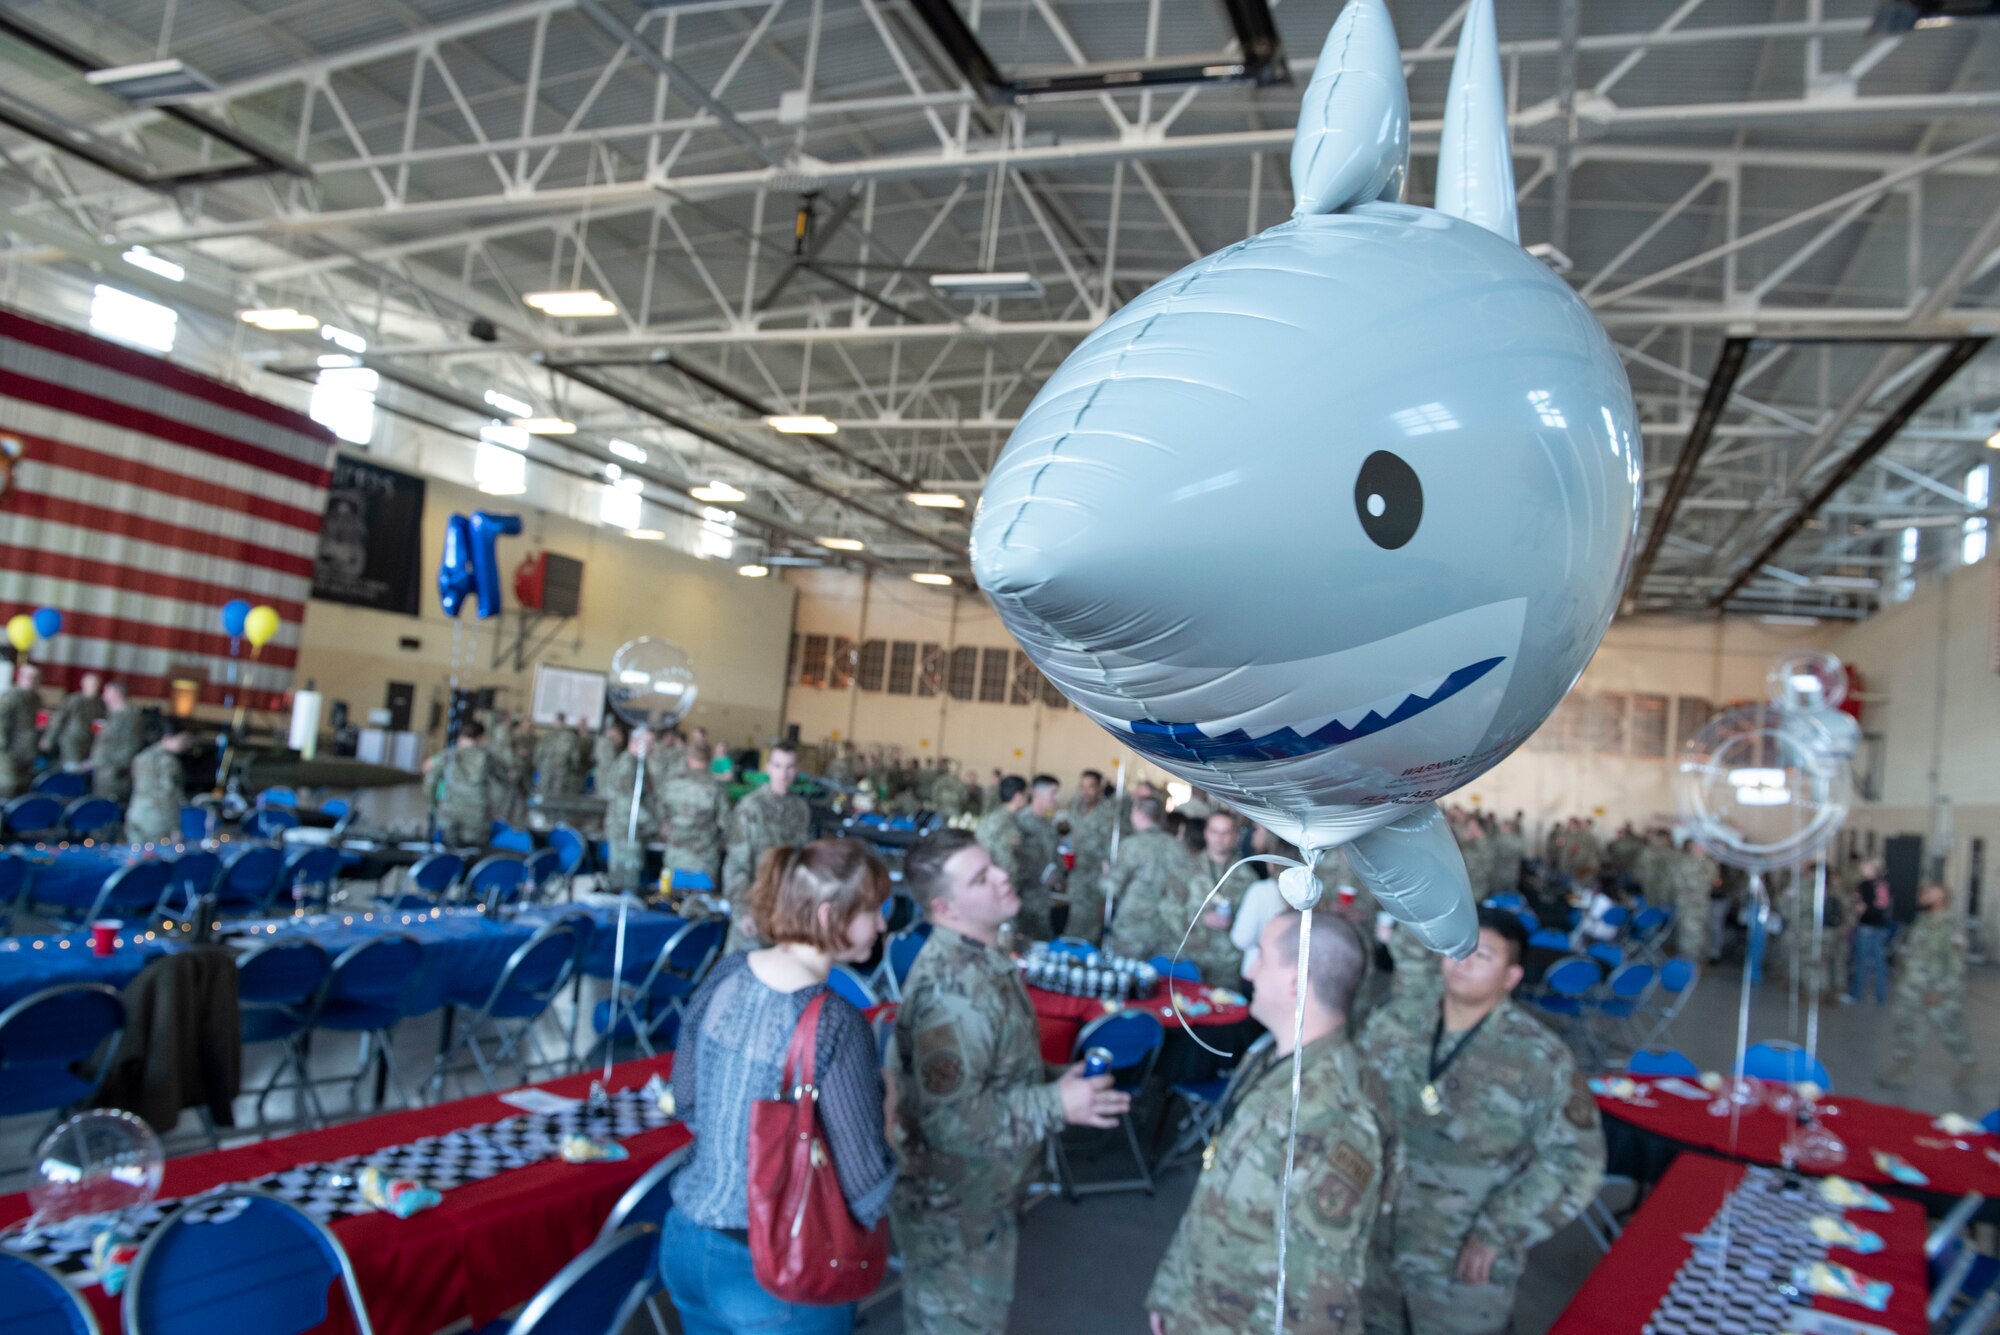 A shark balloon representing the 75th Fighter Squadron Tiger Sharks floats above attendees at the Maintenance Professional of the Year awards banquet at Moody Air Force Base, Georgia, March 25, 2022. During MPOY, Airmen from all of Team Moody’s maintenance squadrons compete to earn awards in various categories. (U.S. Air Force photo by Senior Airman Thomas Johns)